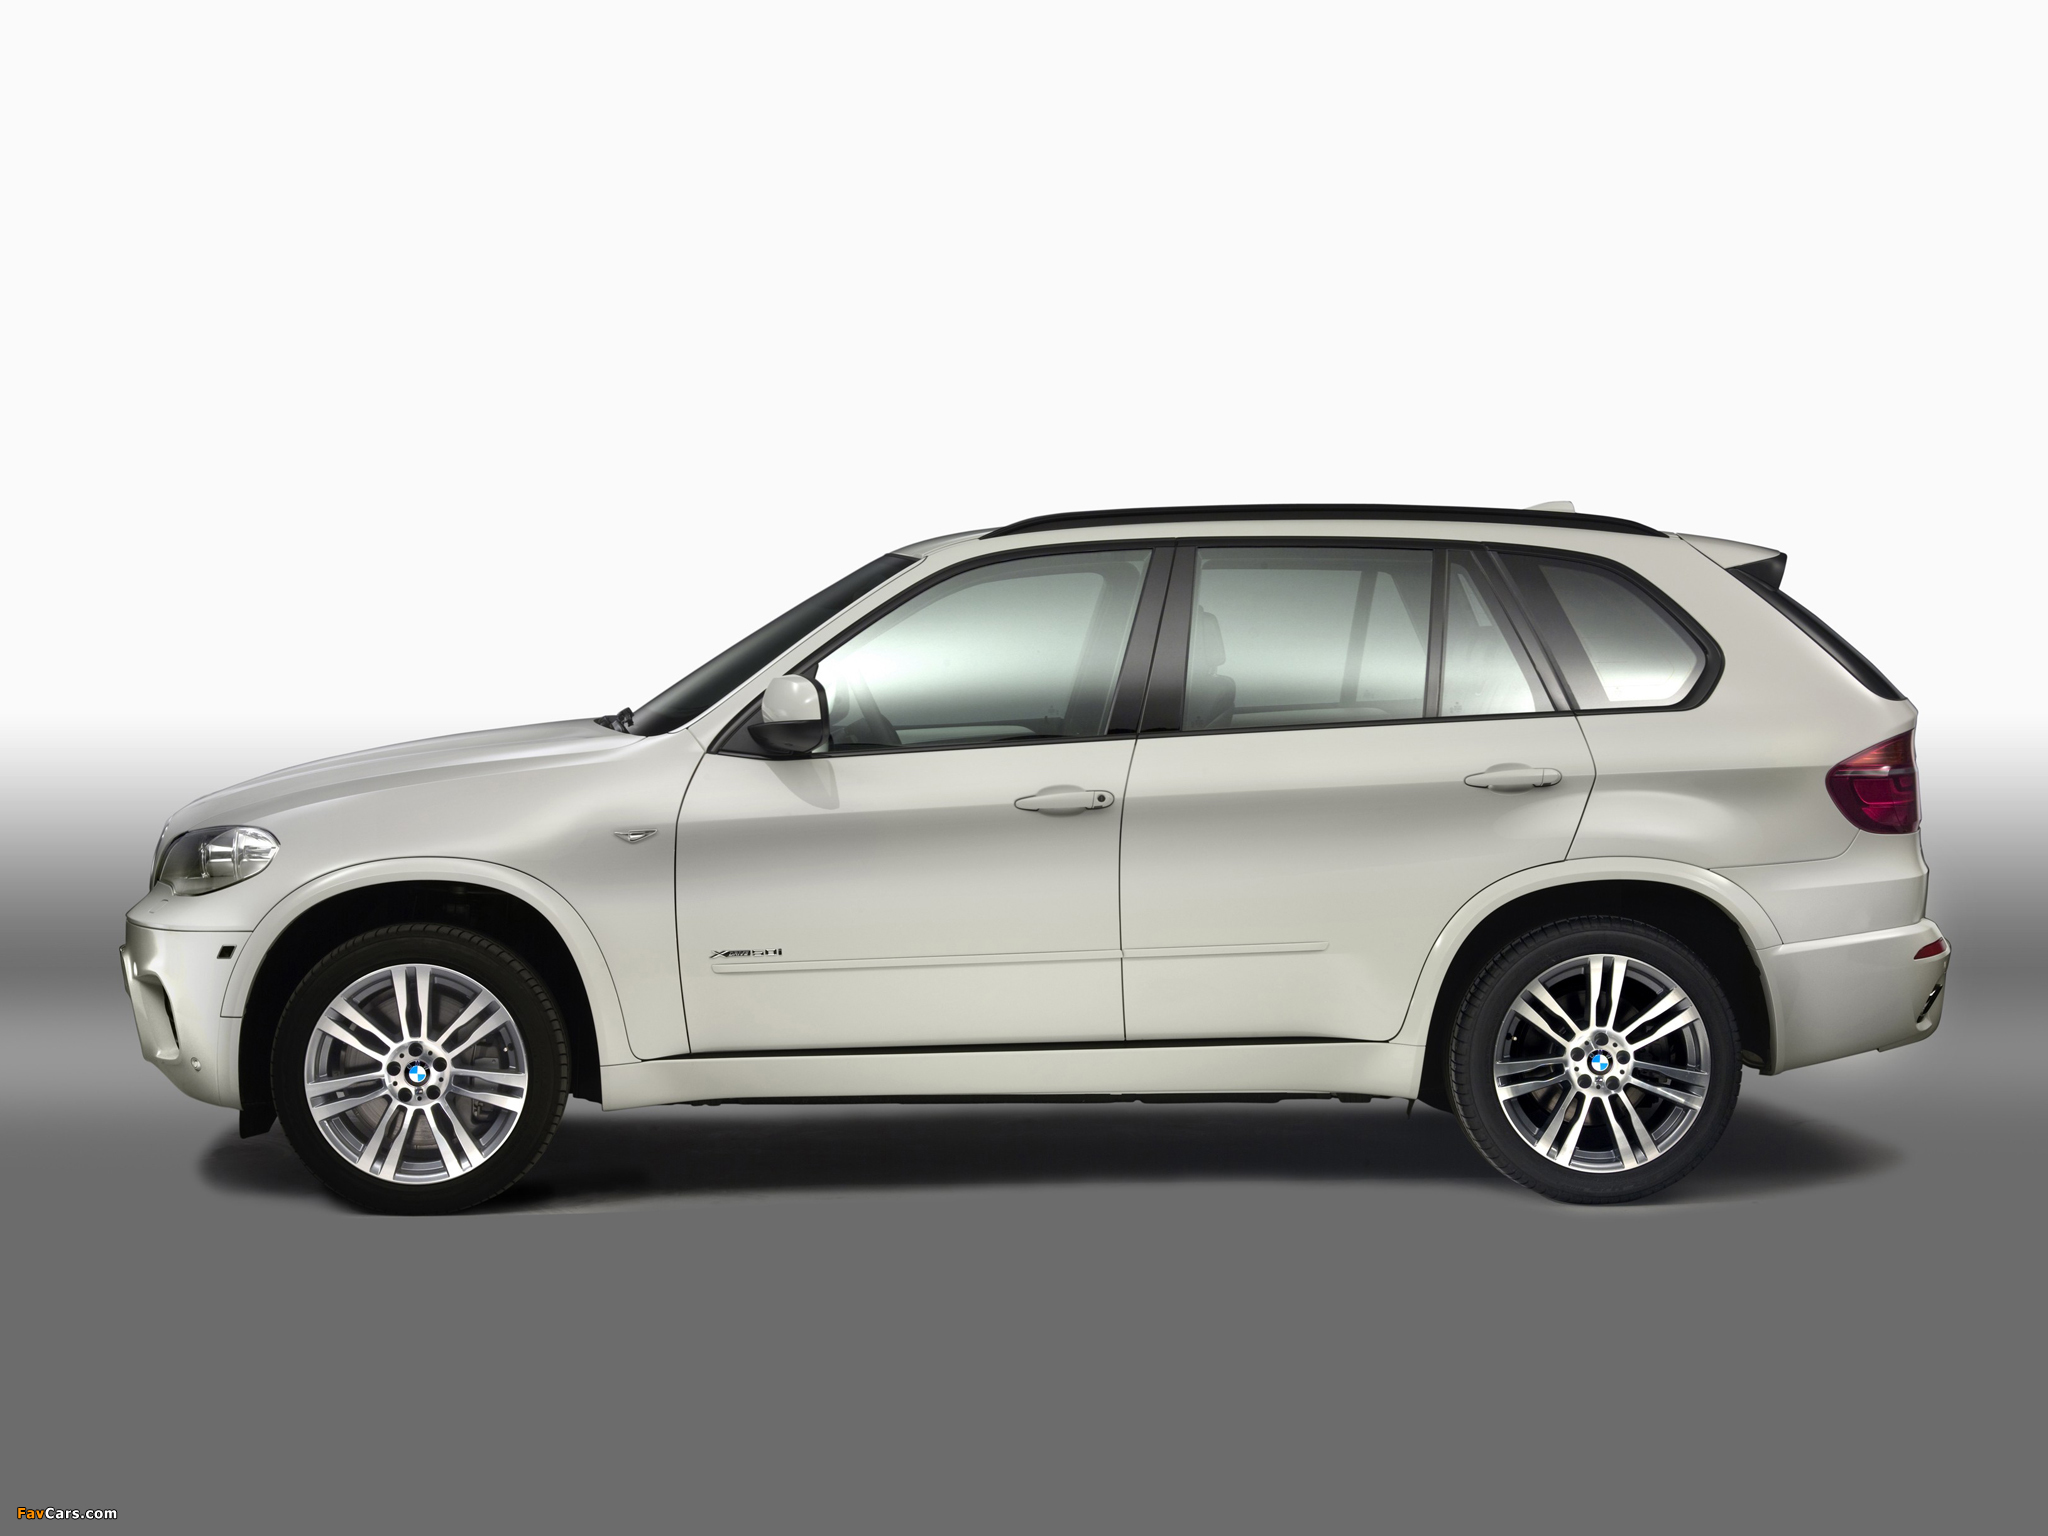 BMW X5 xDrive50i M Sports Package (E70) 2010 pictures (2048 x 1536)